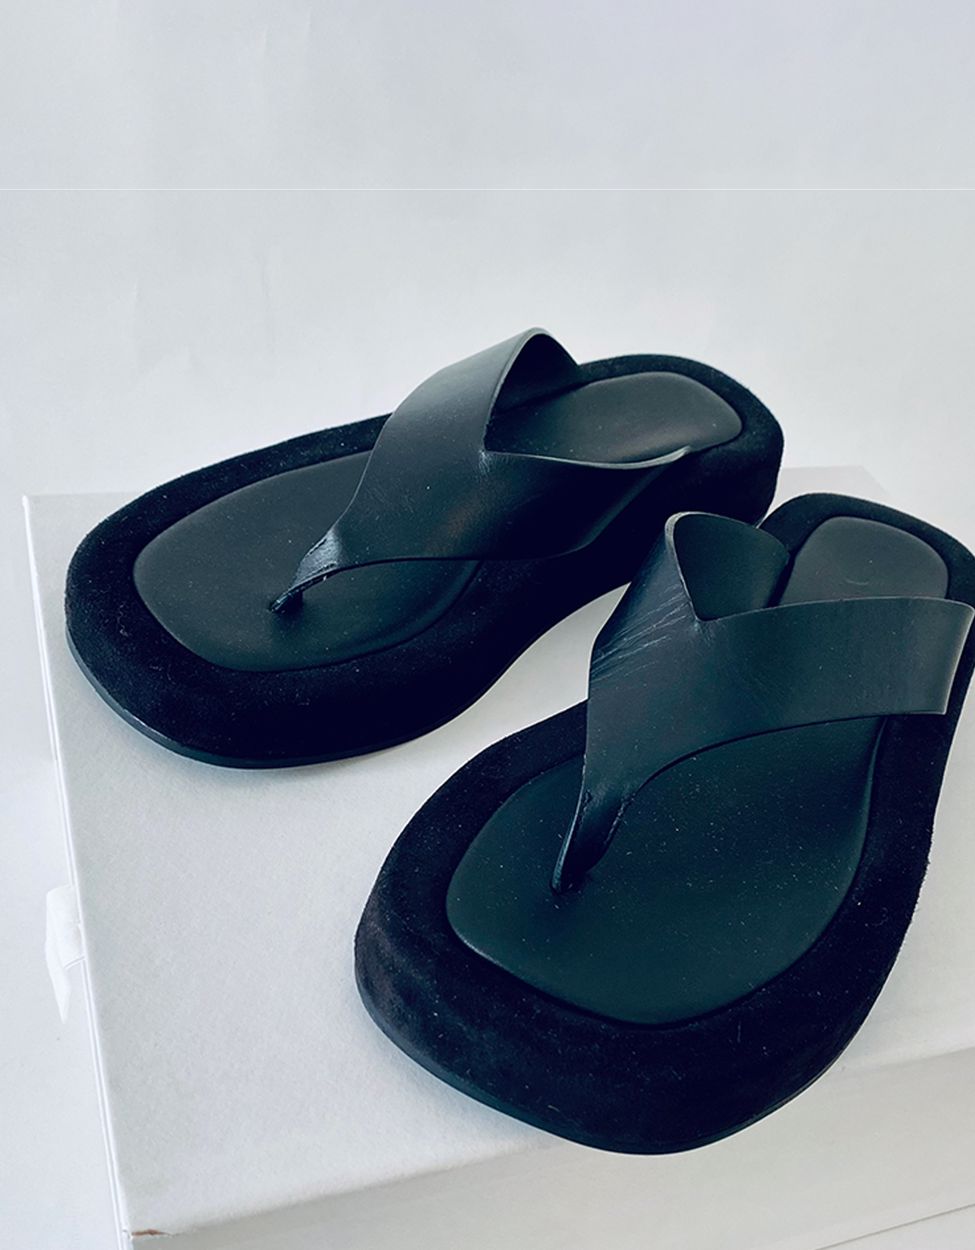 The Row sandals Ginza black size 38,5 w. box